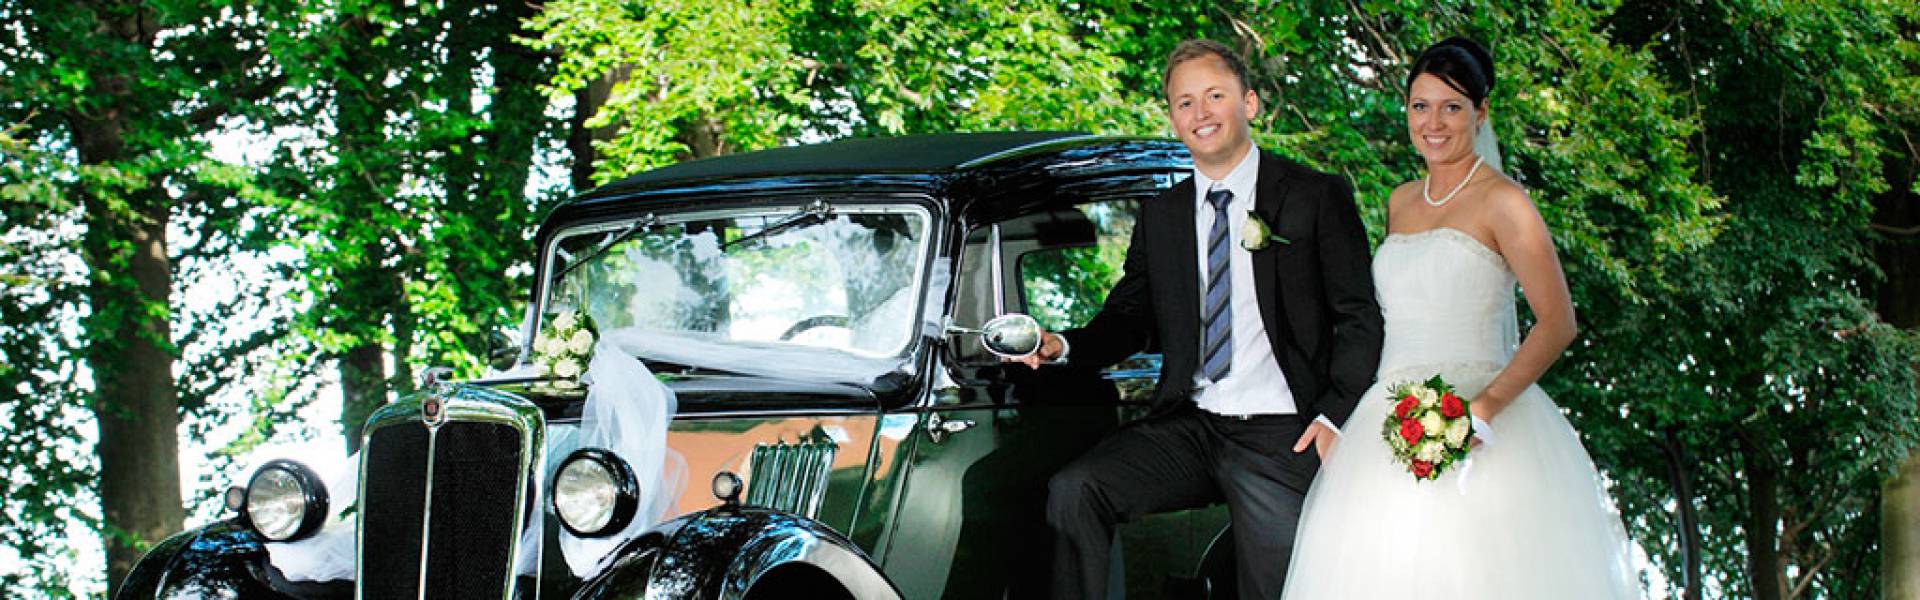 Adelaide Classic Wedding Car Hire 5 Star Service Instant Quote